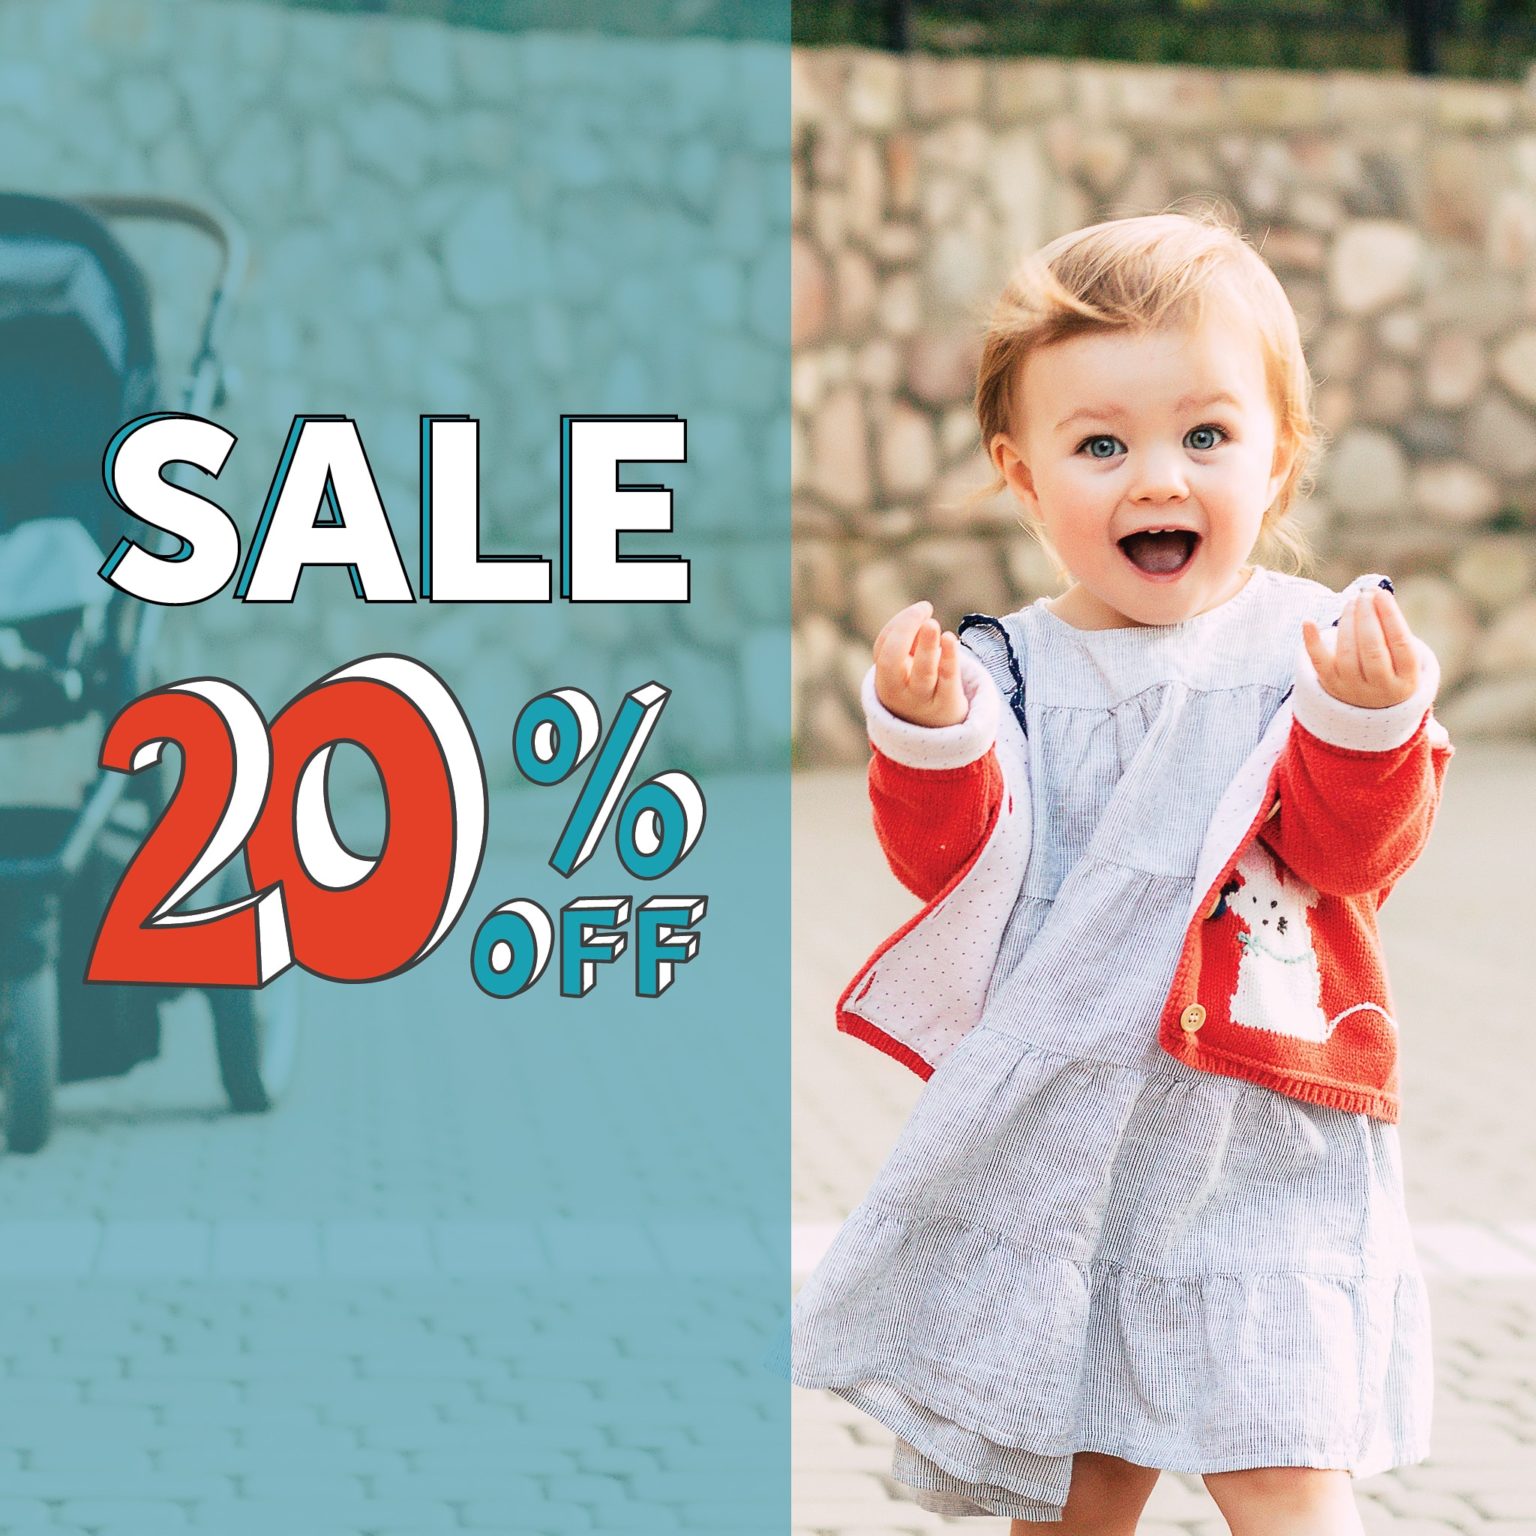 Sale: 20% off. Toddler aged girl excited outside.